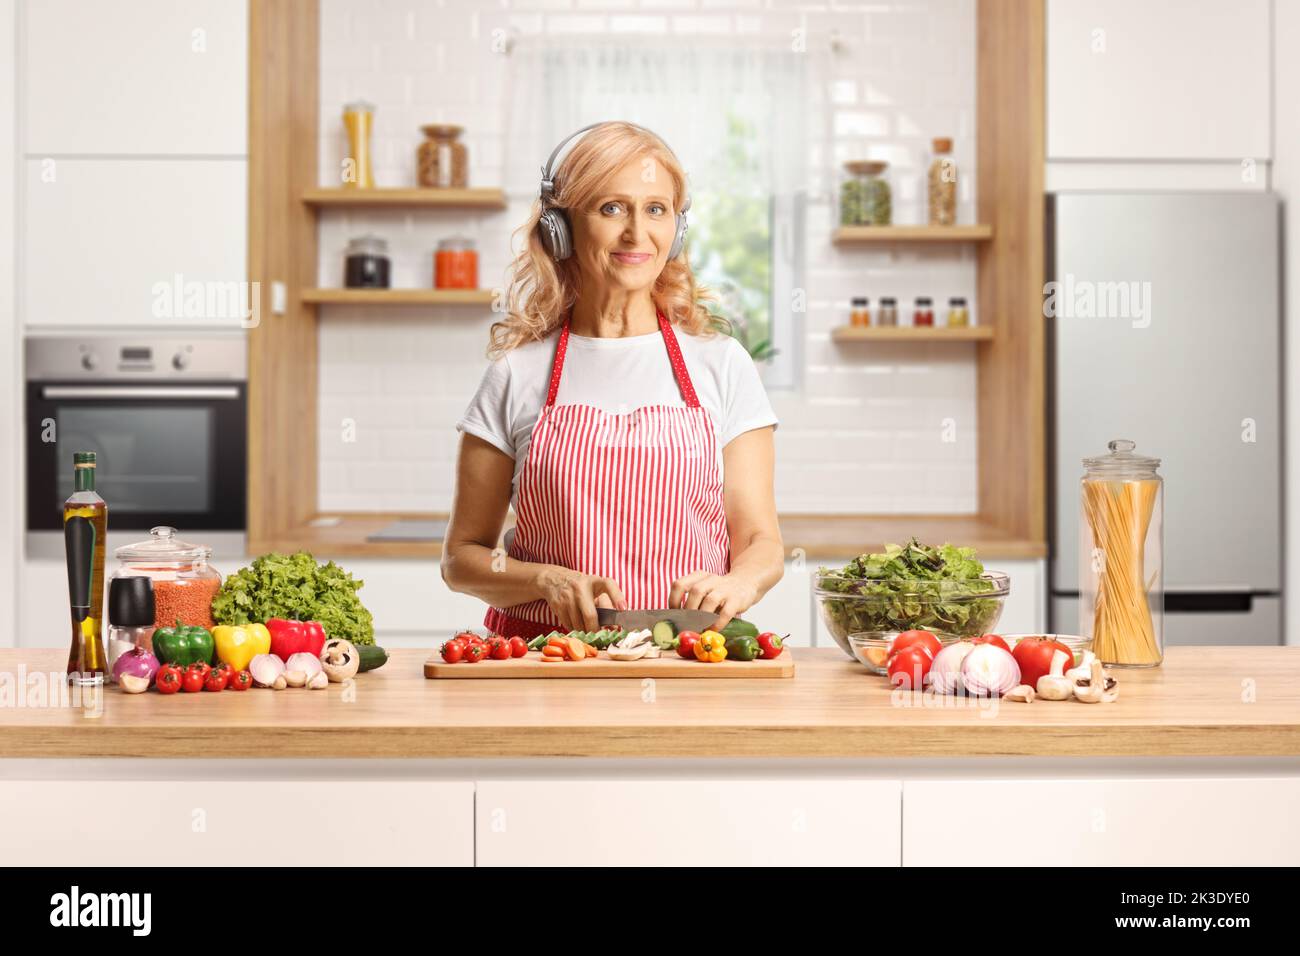 Housewife cooking and listening to music with headphones inside a kitchen Stock Photo